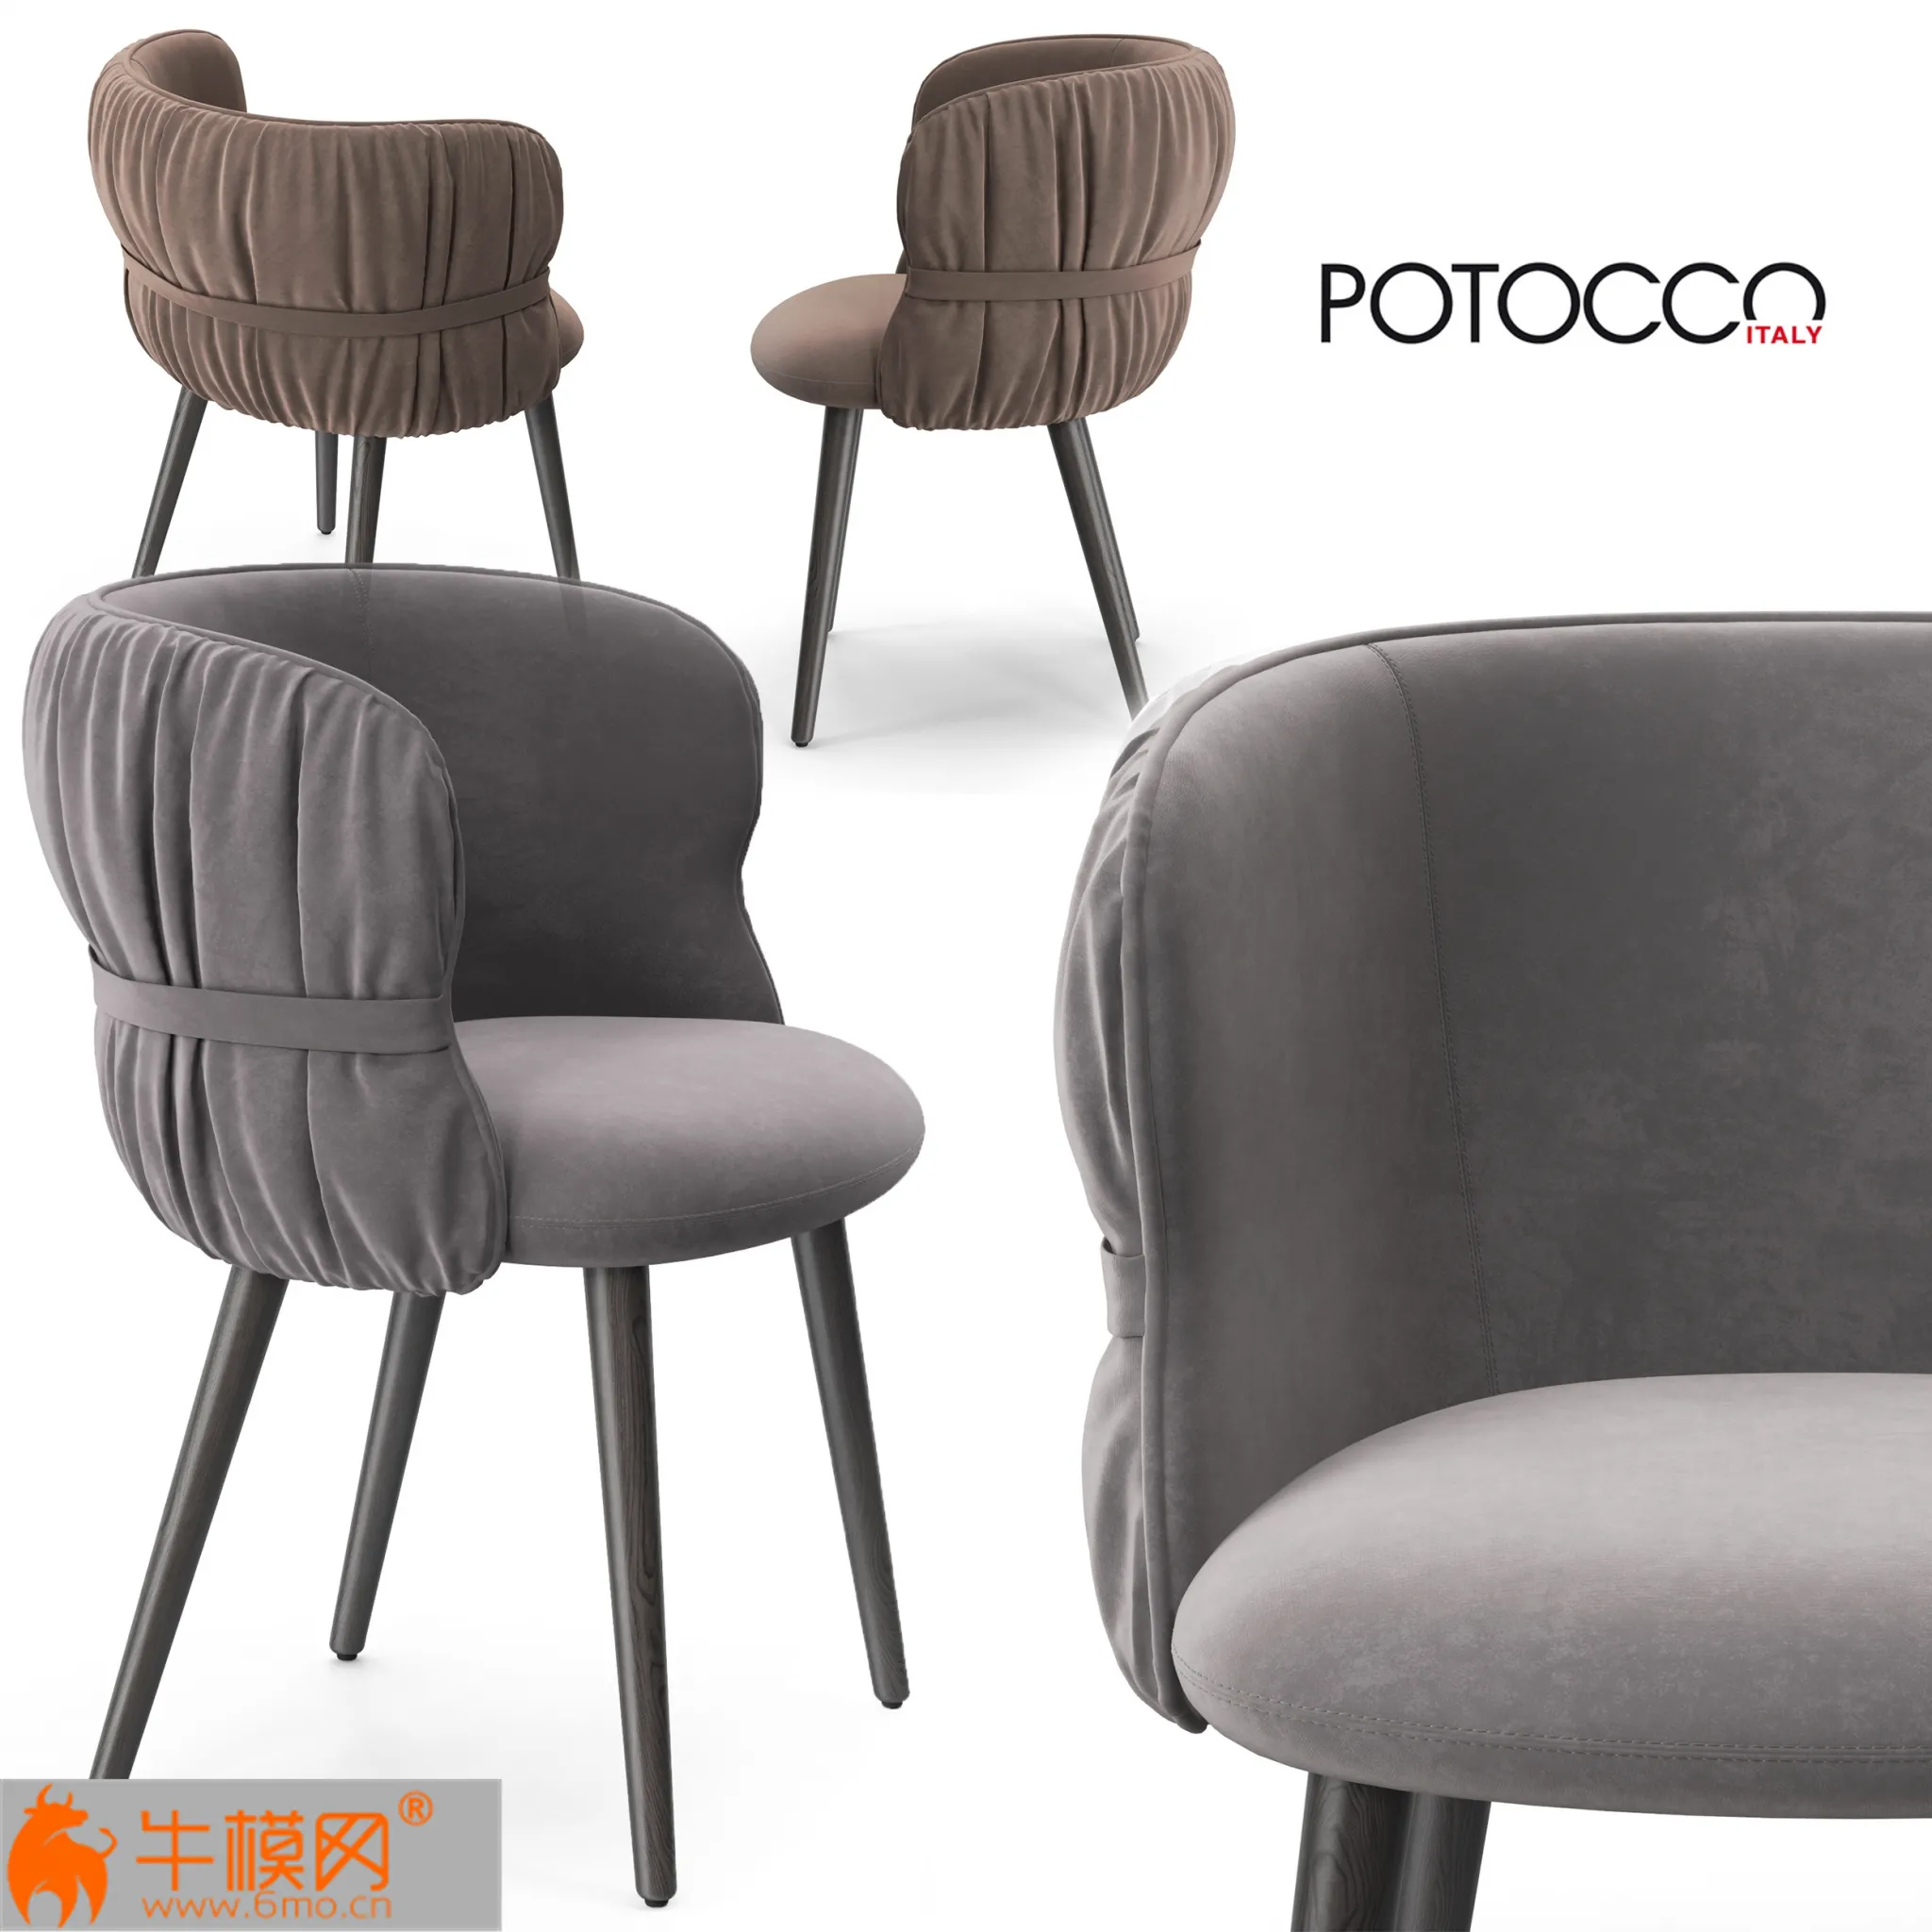 Potocco Coulisse armchair – 3429